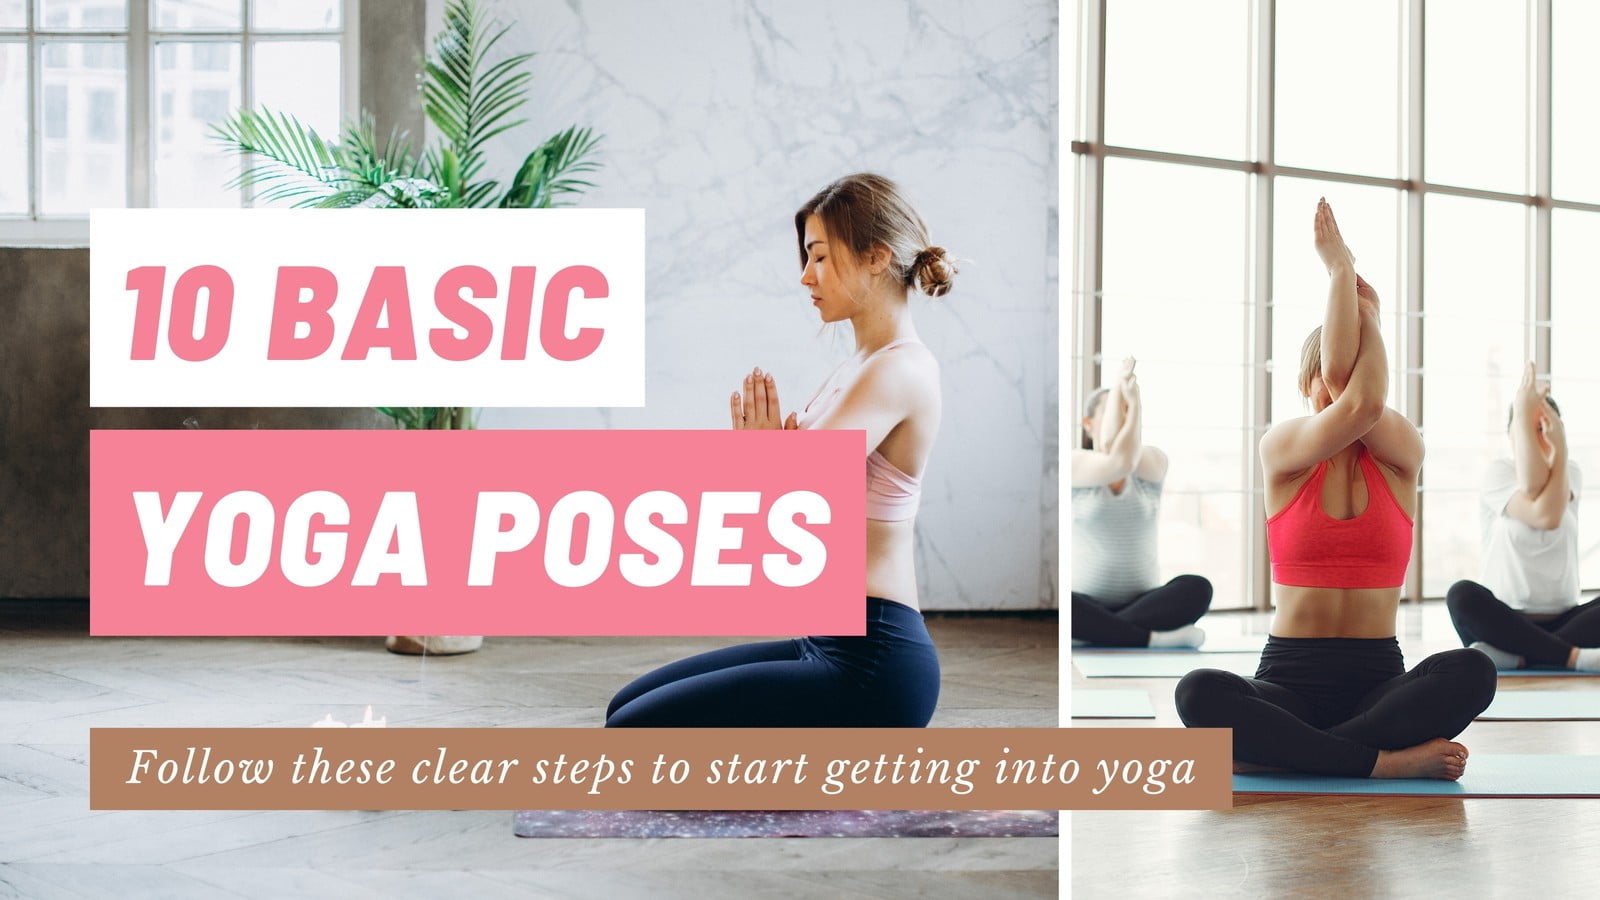 How to Play with Yoga Cards for Kids (+ Printable Poster)